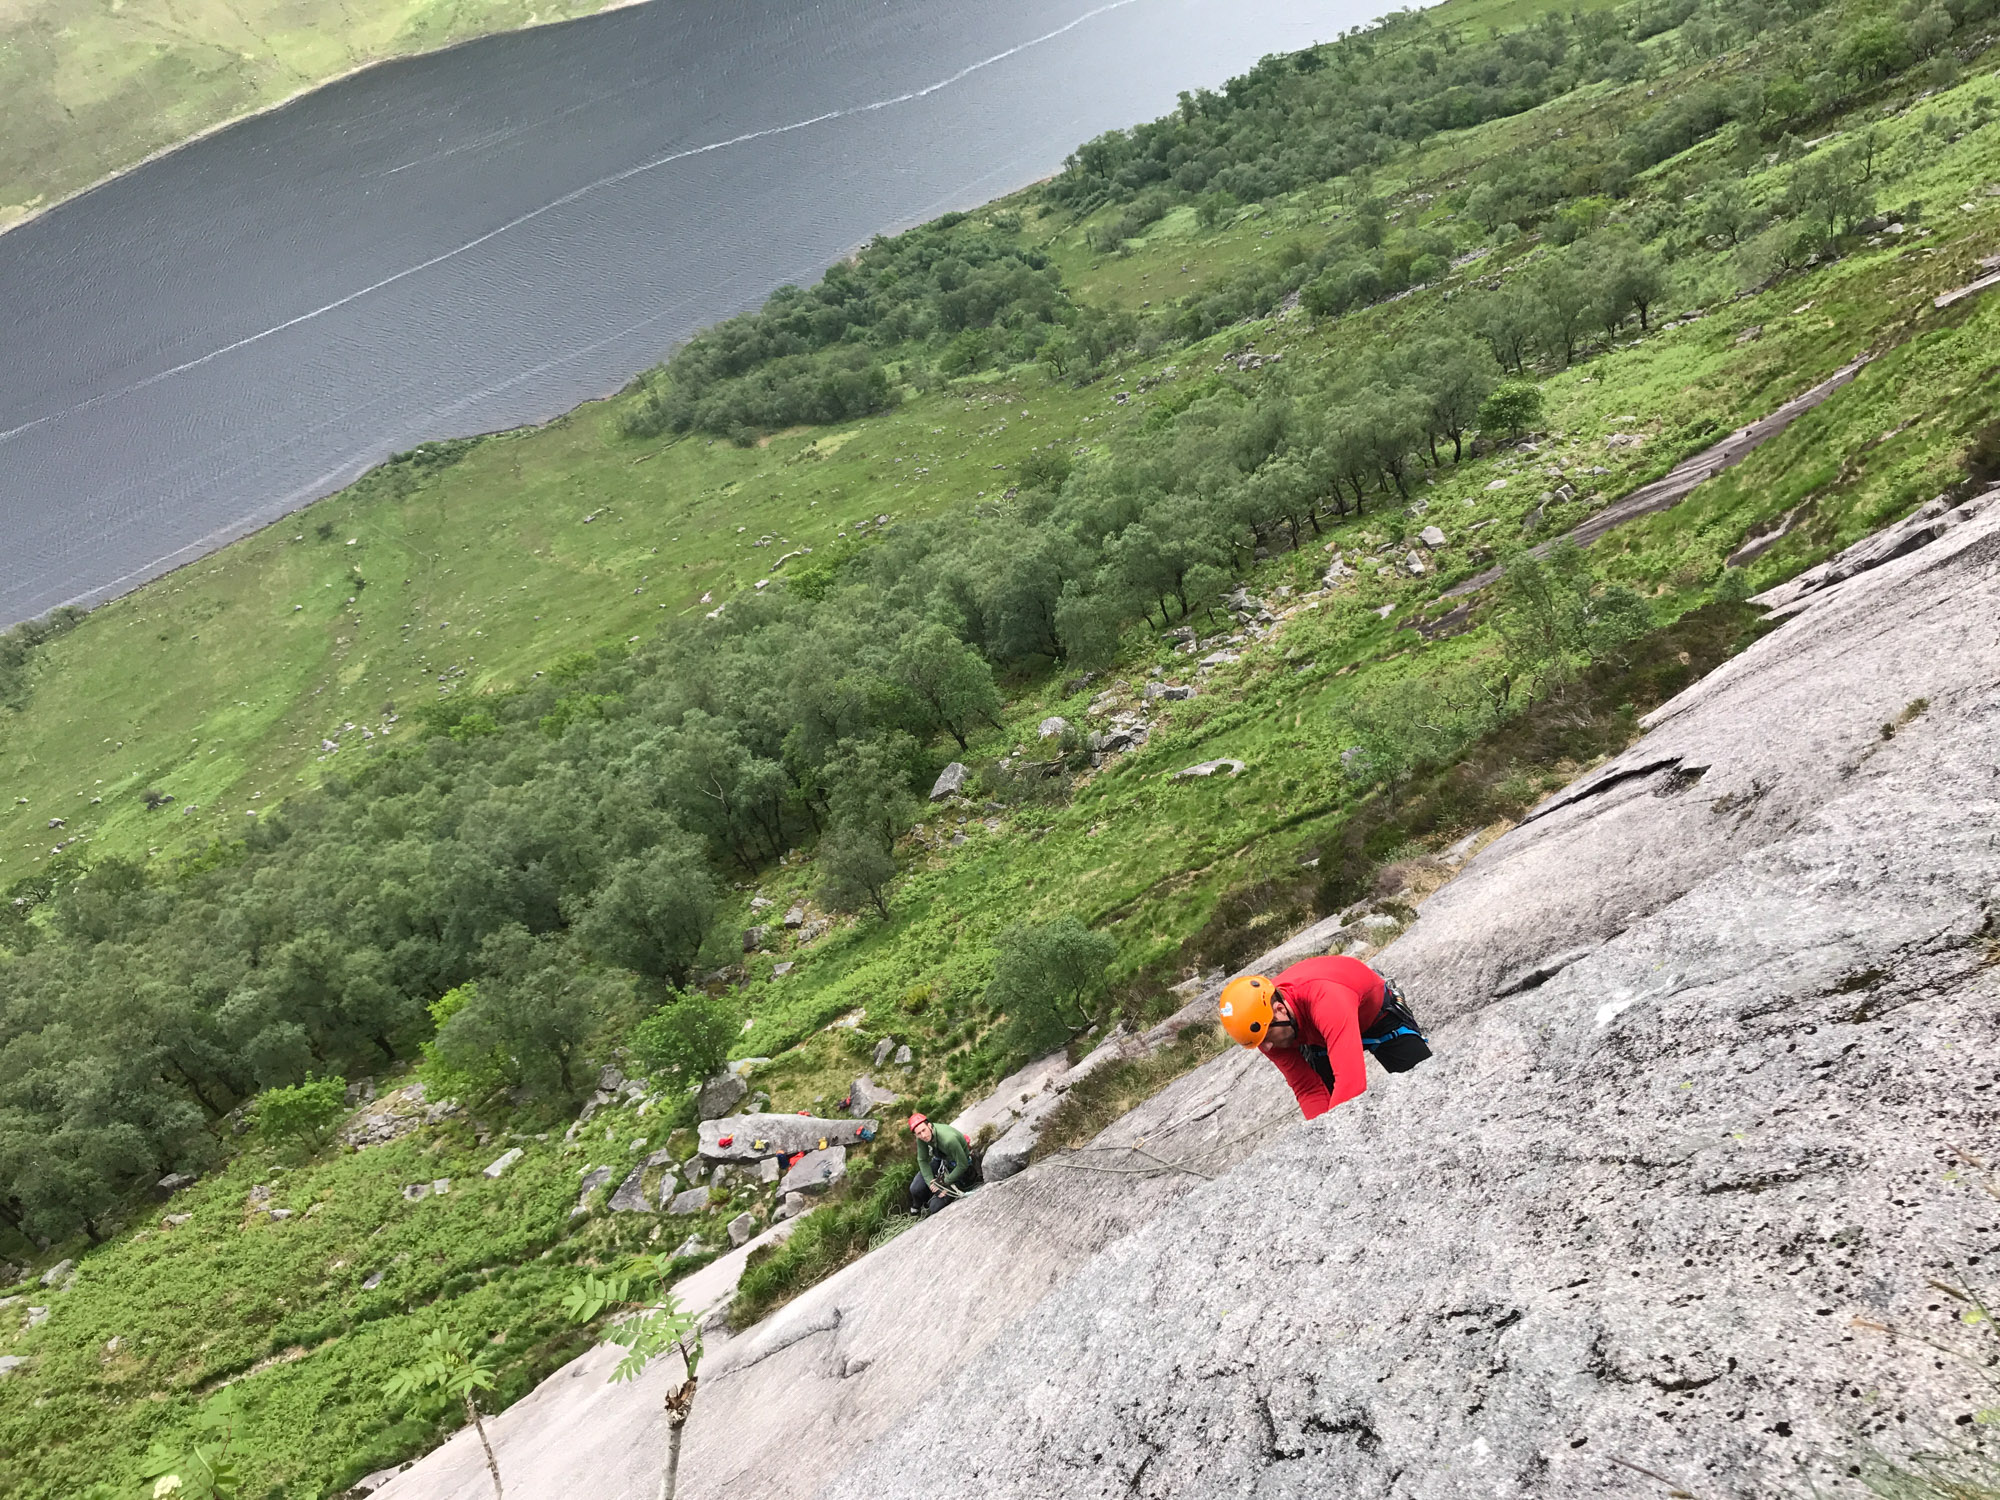 Leaving the heather and midges behind at the start of the crux third pitch. Photo credit: Cassim Ladha